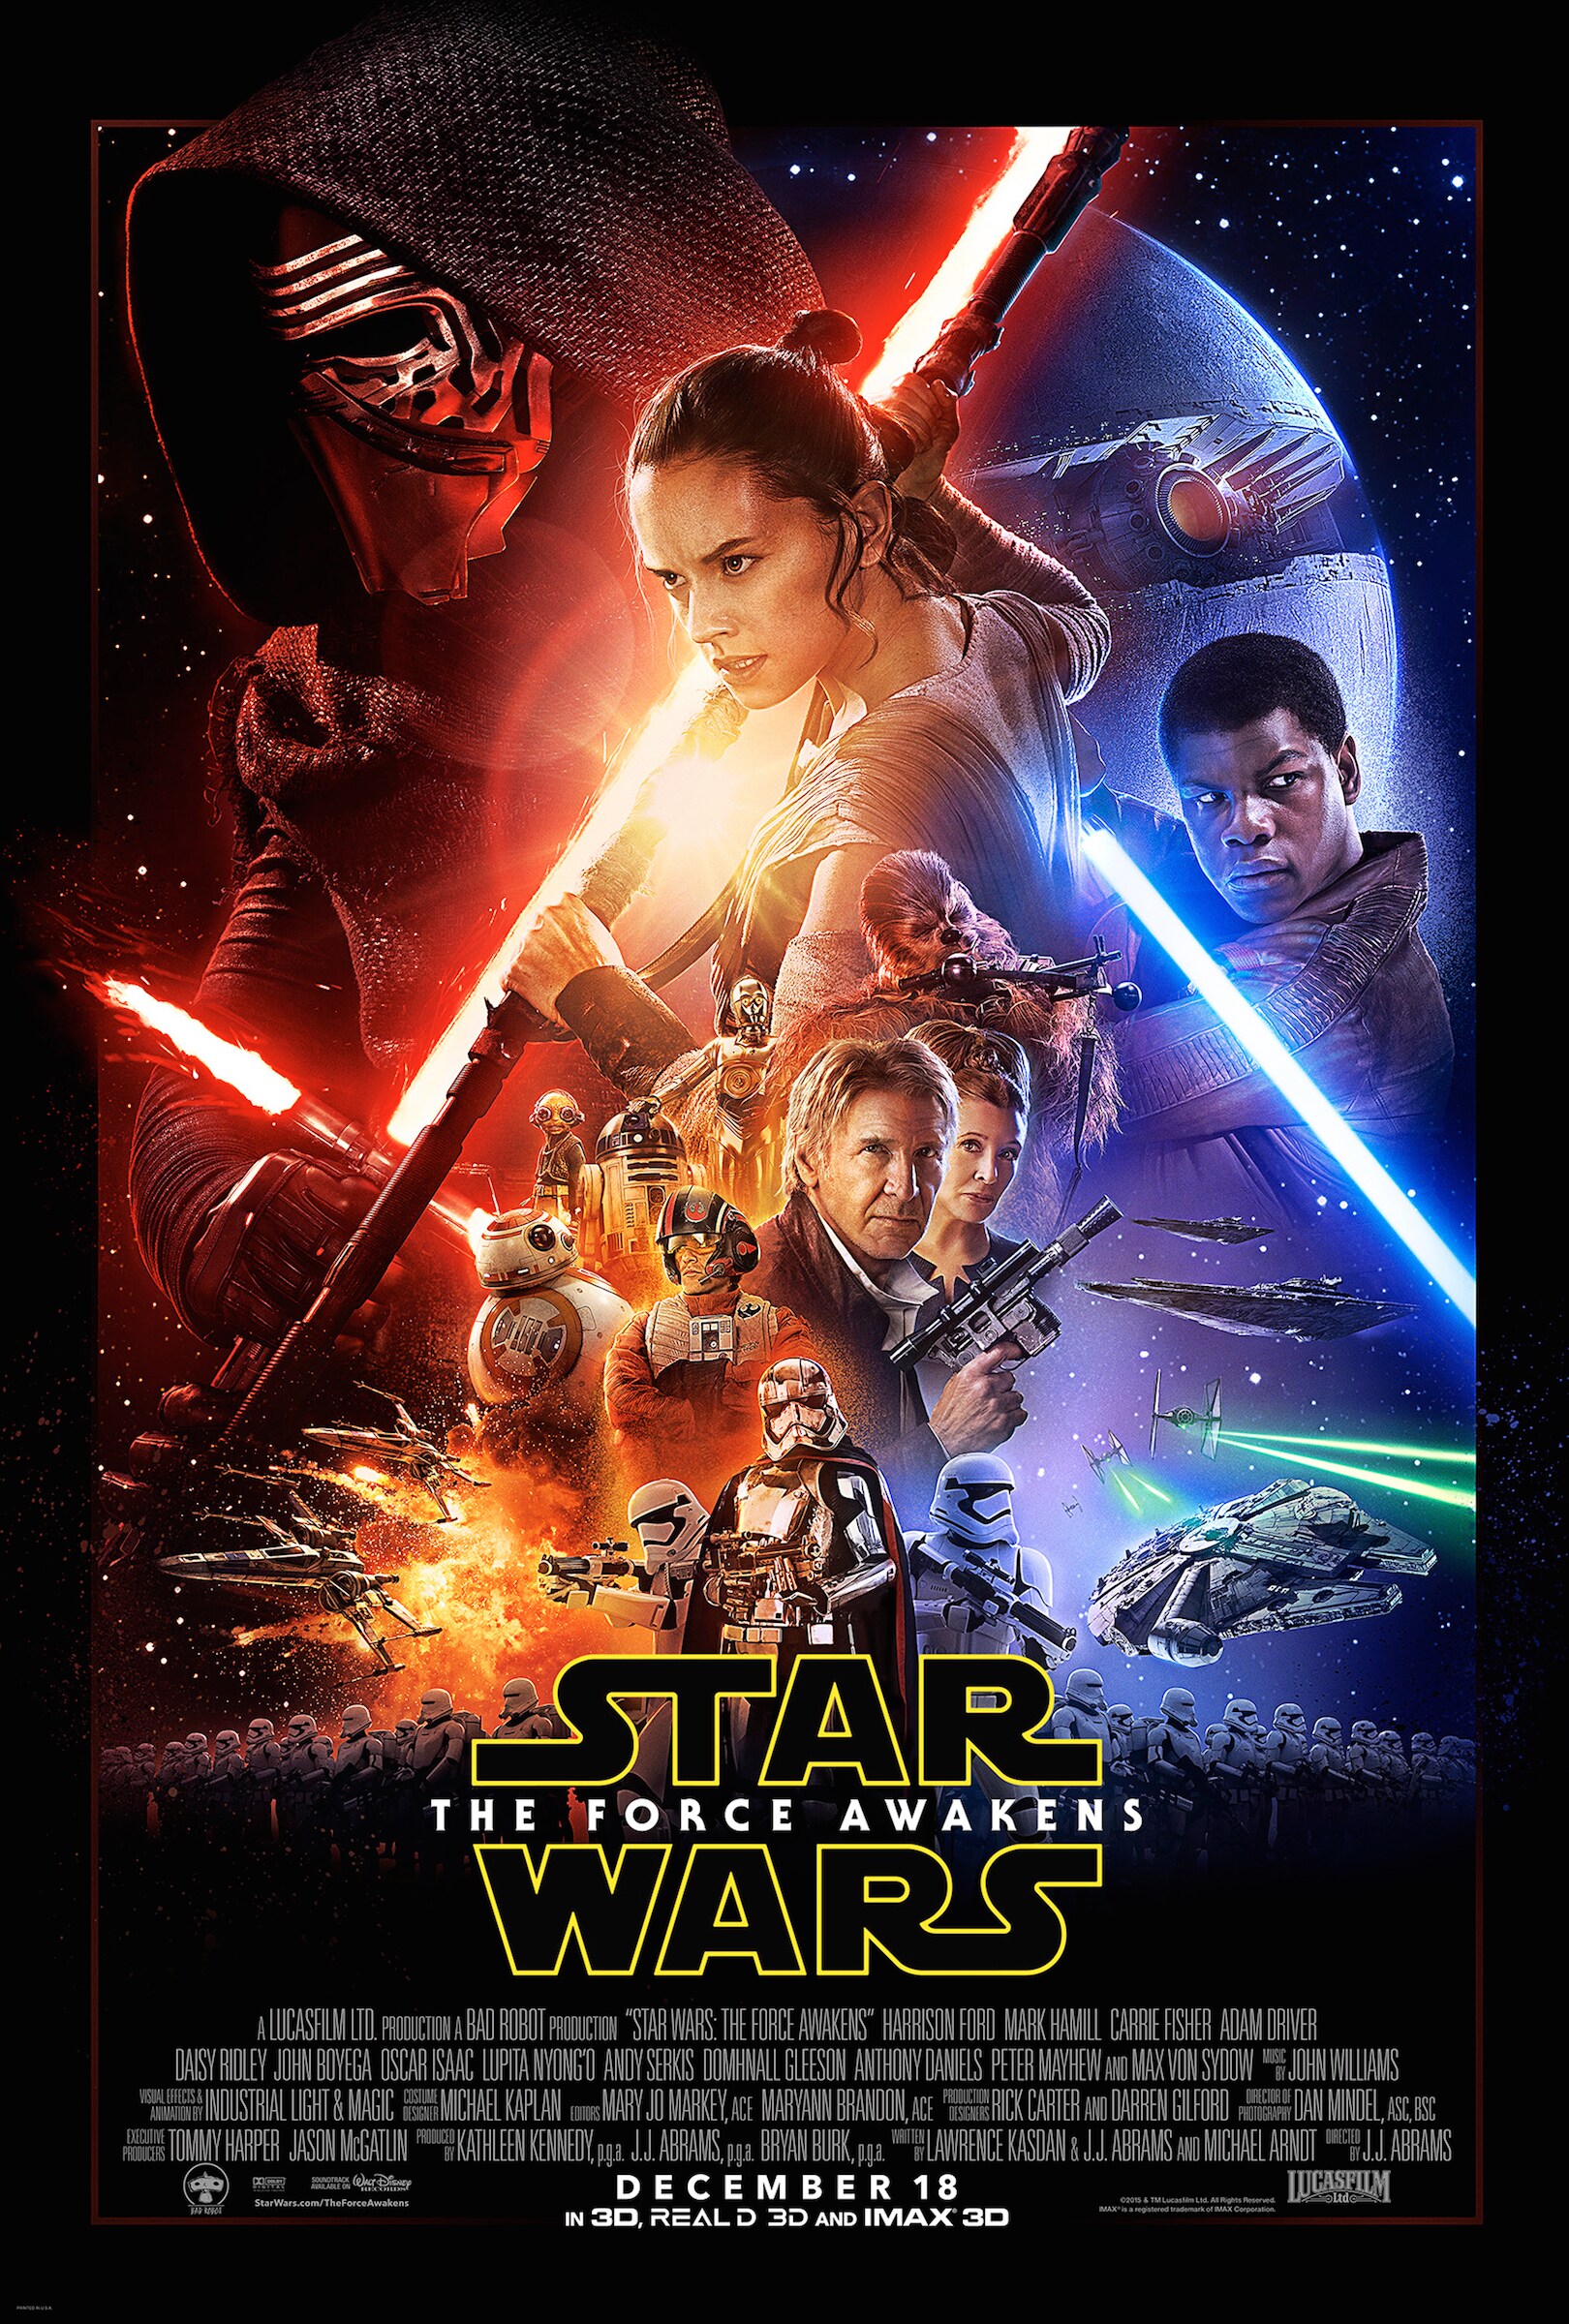 download all star wars movies